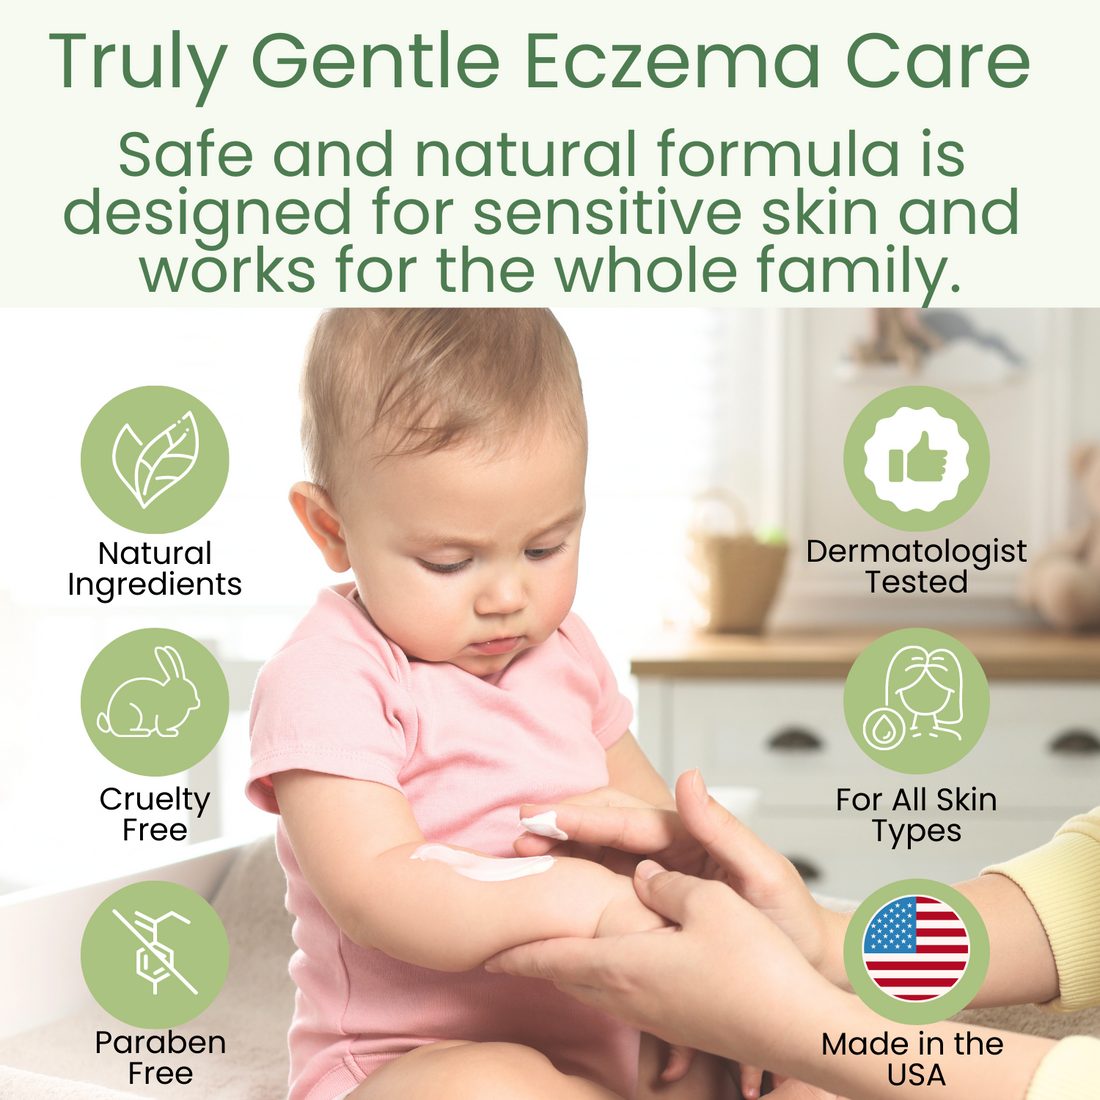 Truly Gentle Eczema Care - Safe and gentle formula is designed for sensitive skin and works for the whole family.